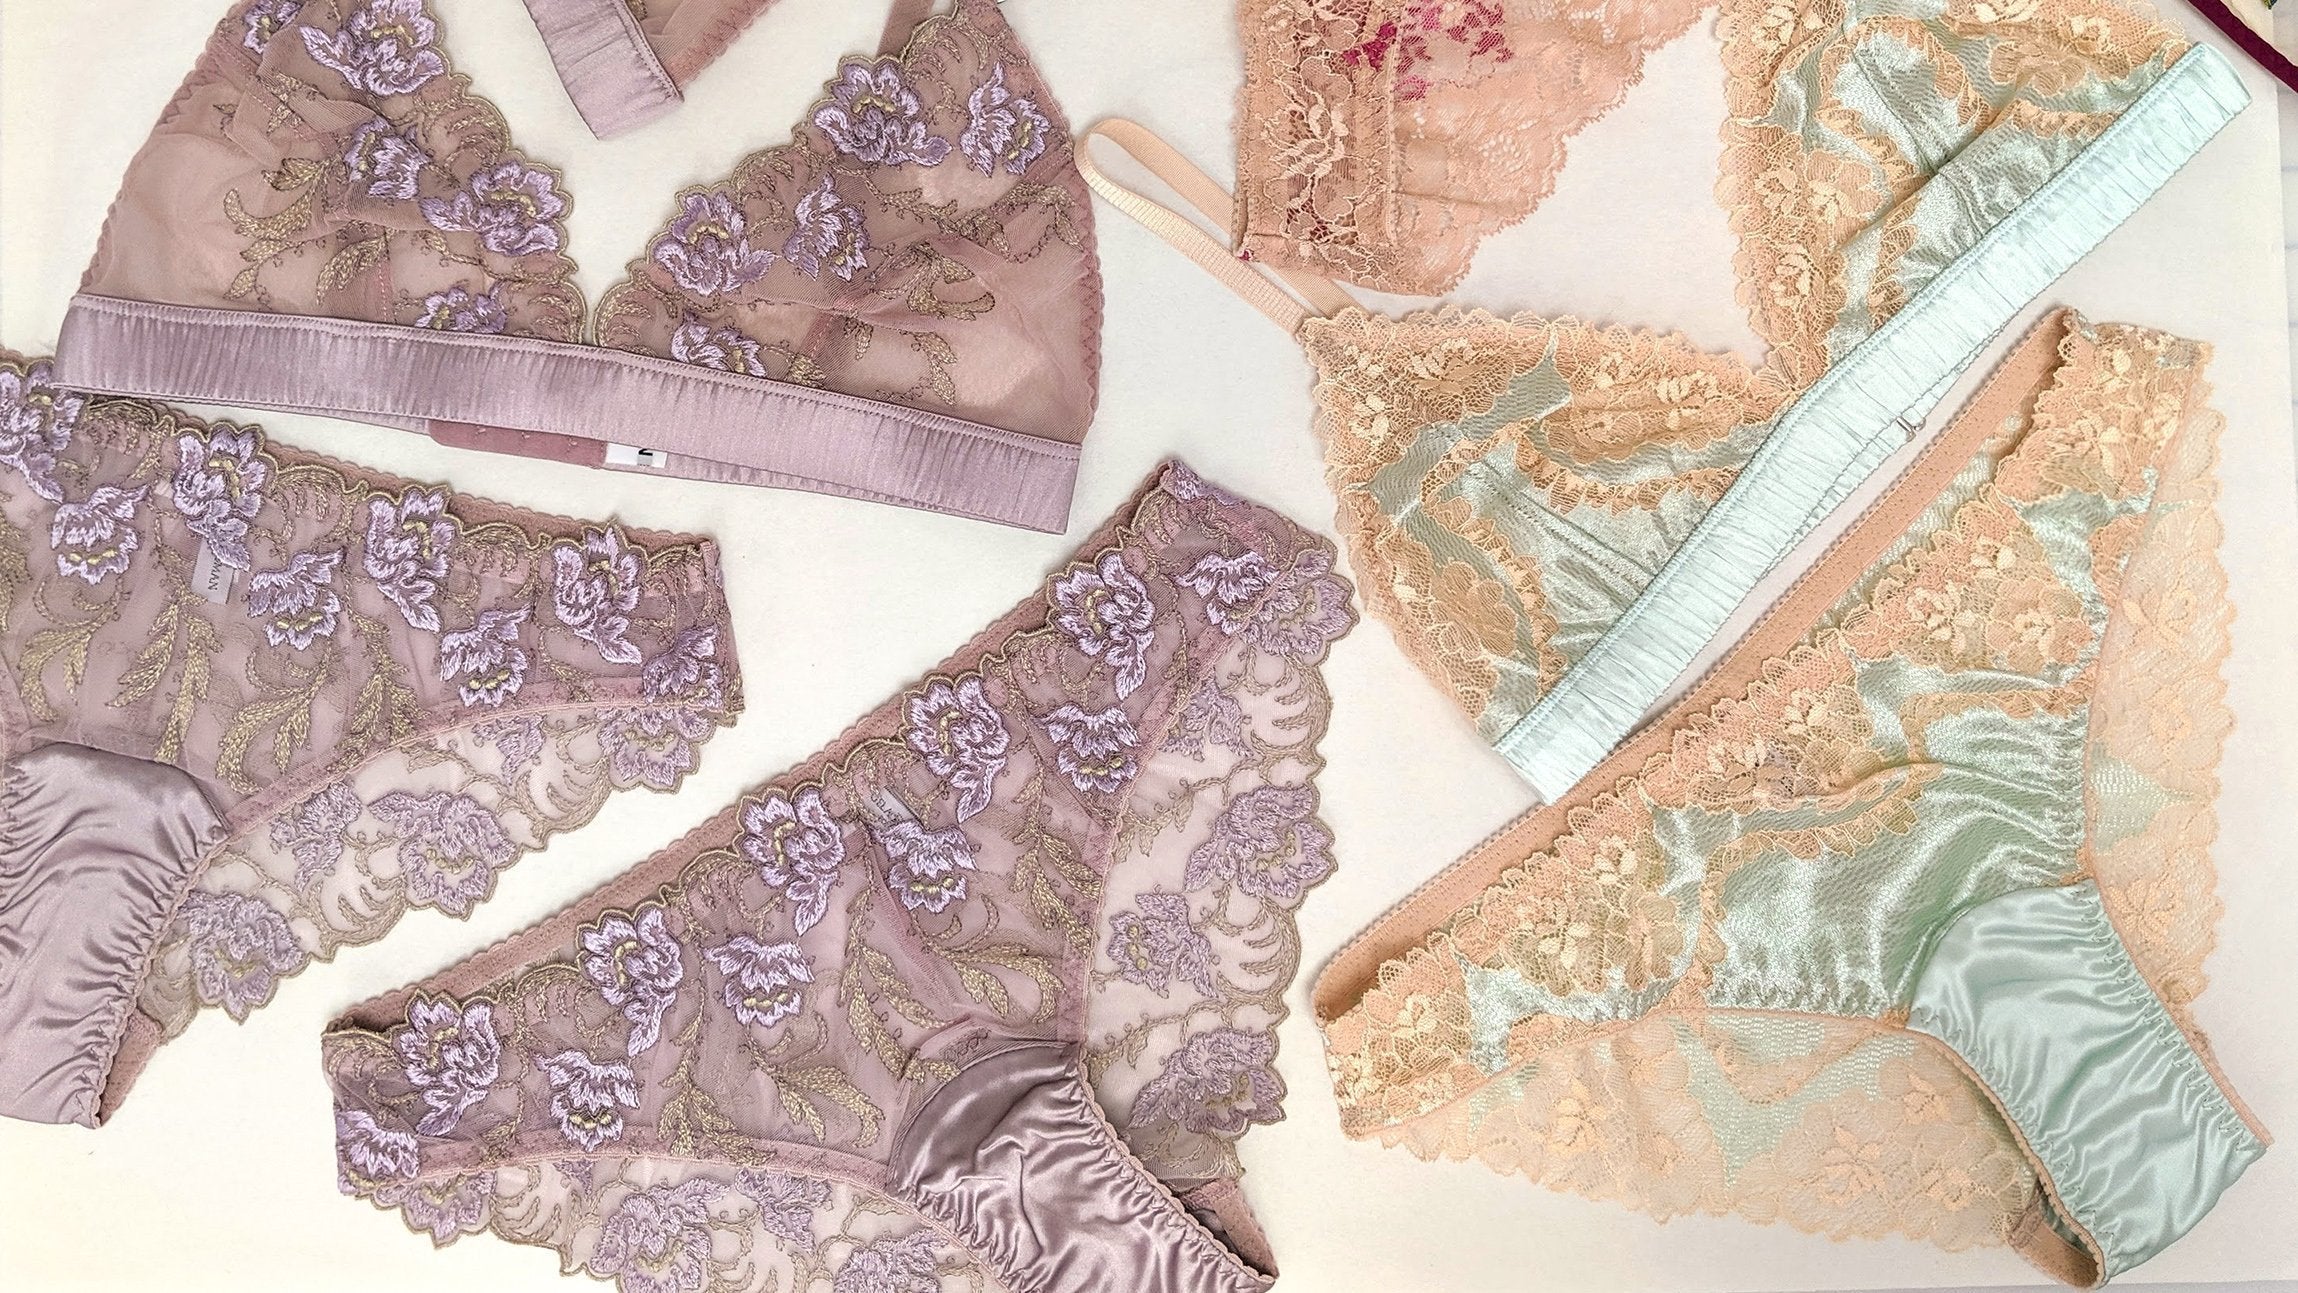 Lingerie terminology: A glossary